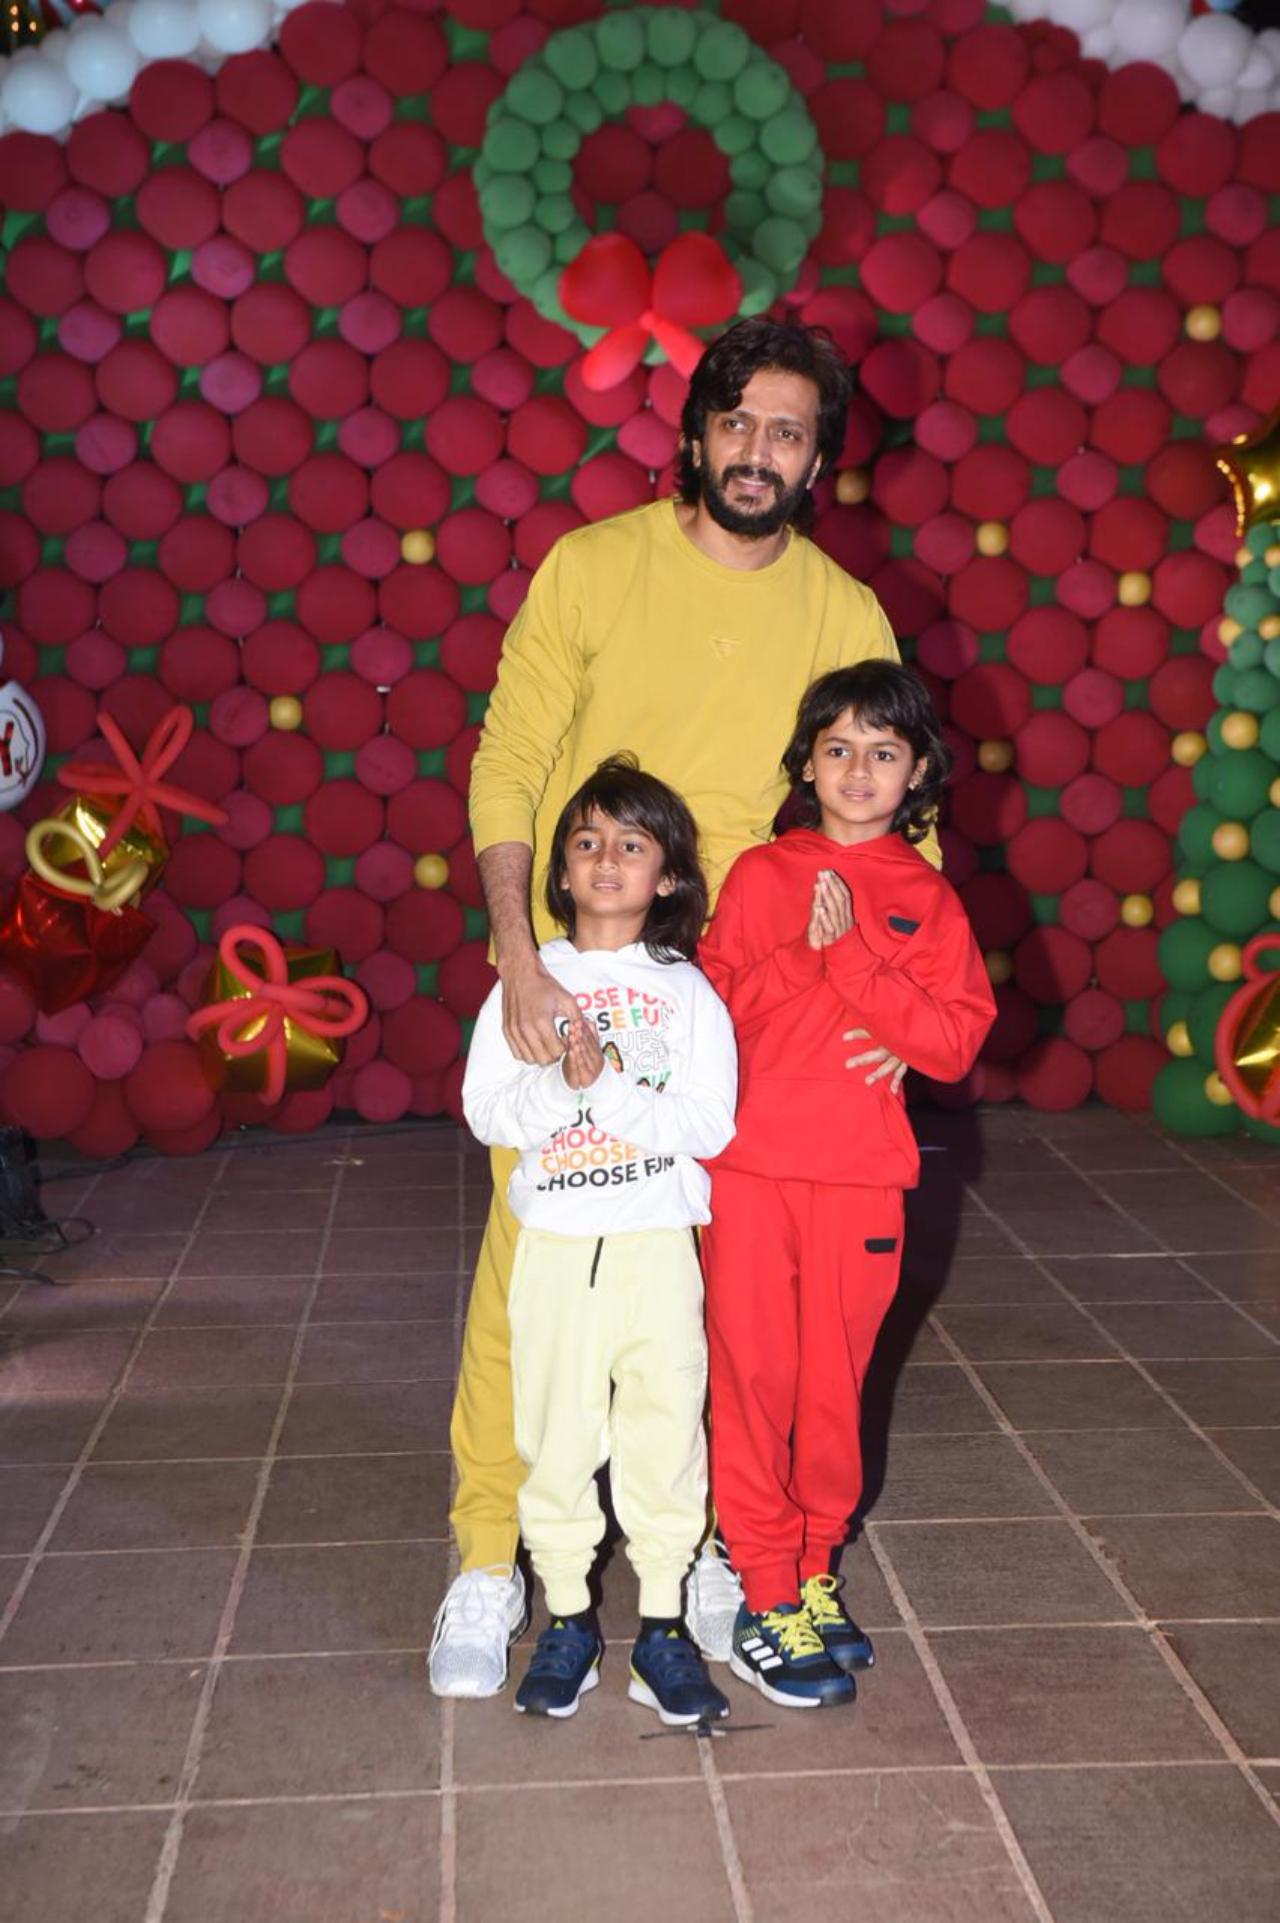 Riteish Deshmukh and Genelia Deshmukh who are close friends of the Khan family arrived for the party with their sons